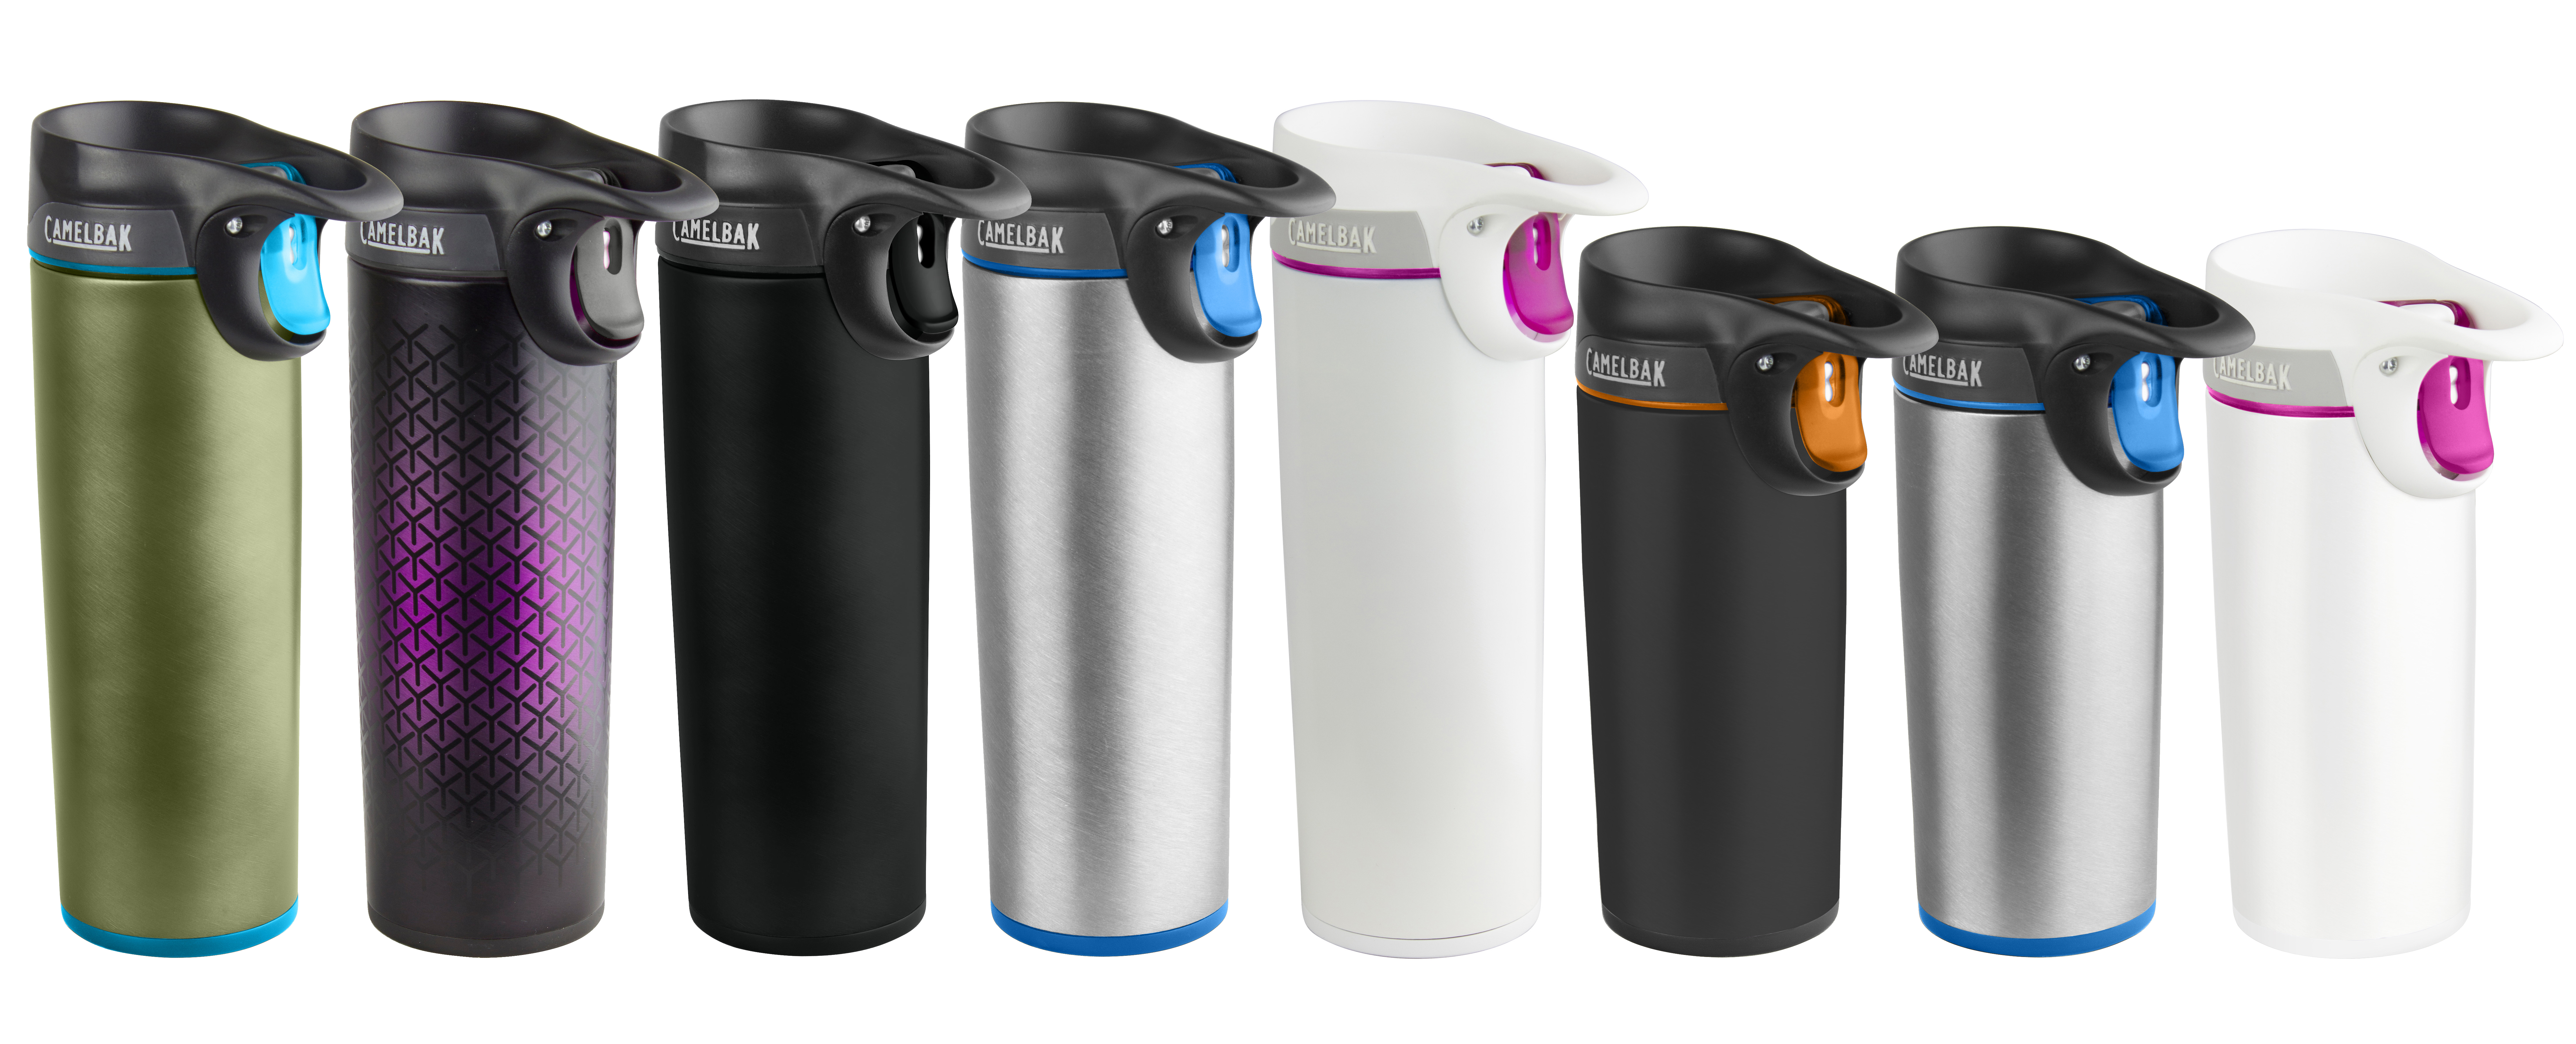 US – CamelBak launches self-sealing, leak-proof mug for coffee or